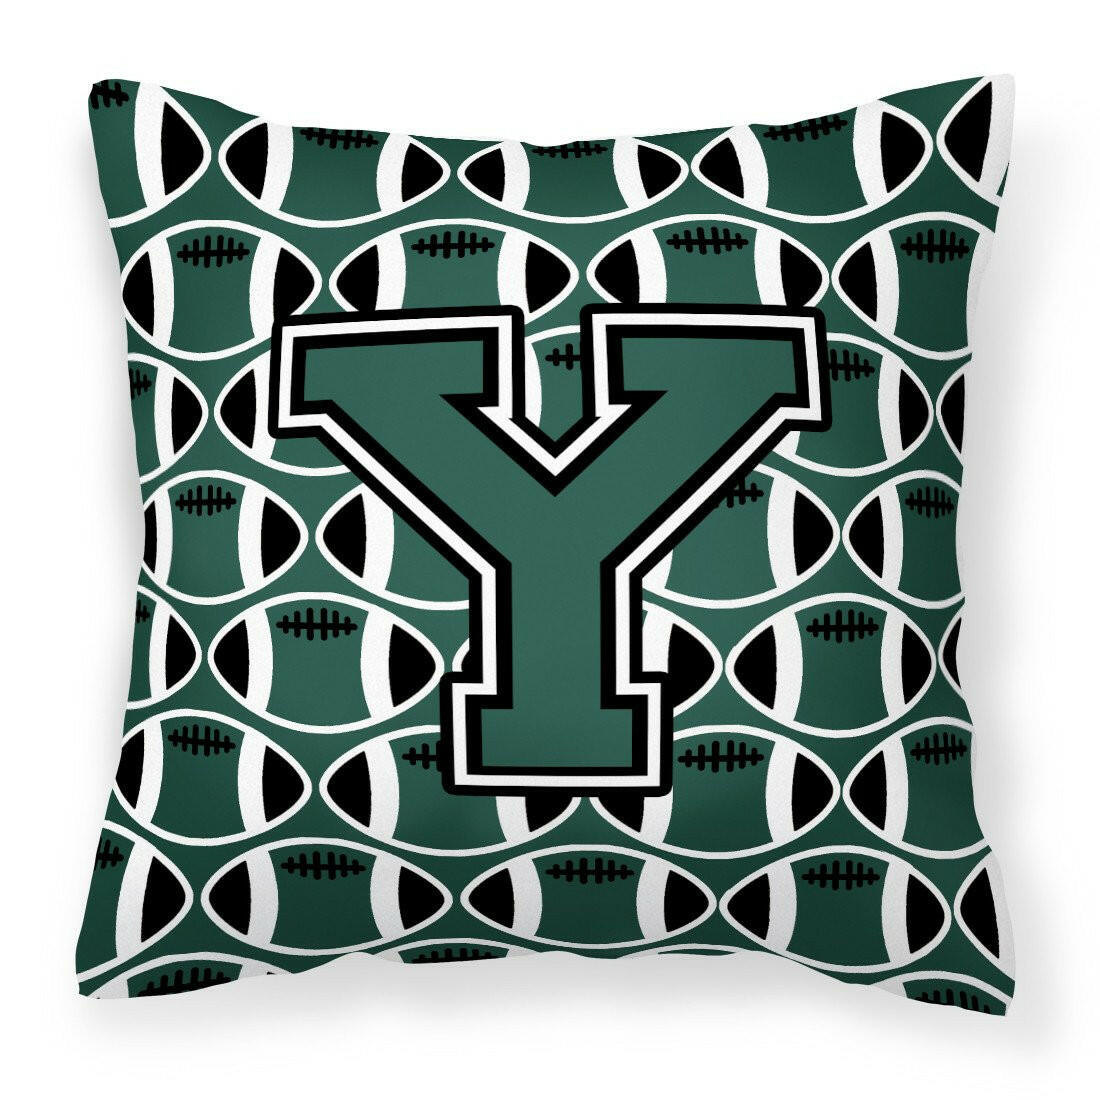 Letter Y Football Green and White Fabric Decorative Pillow CJ1071-YPW1414 by Caroline's Treasures